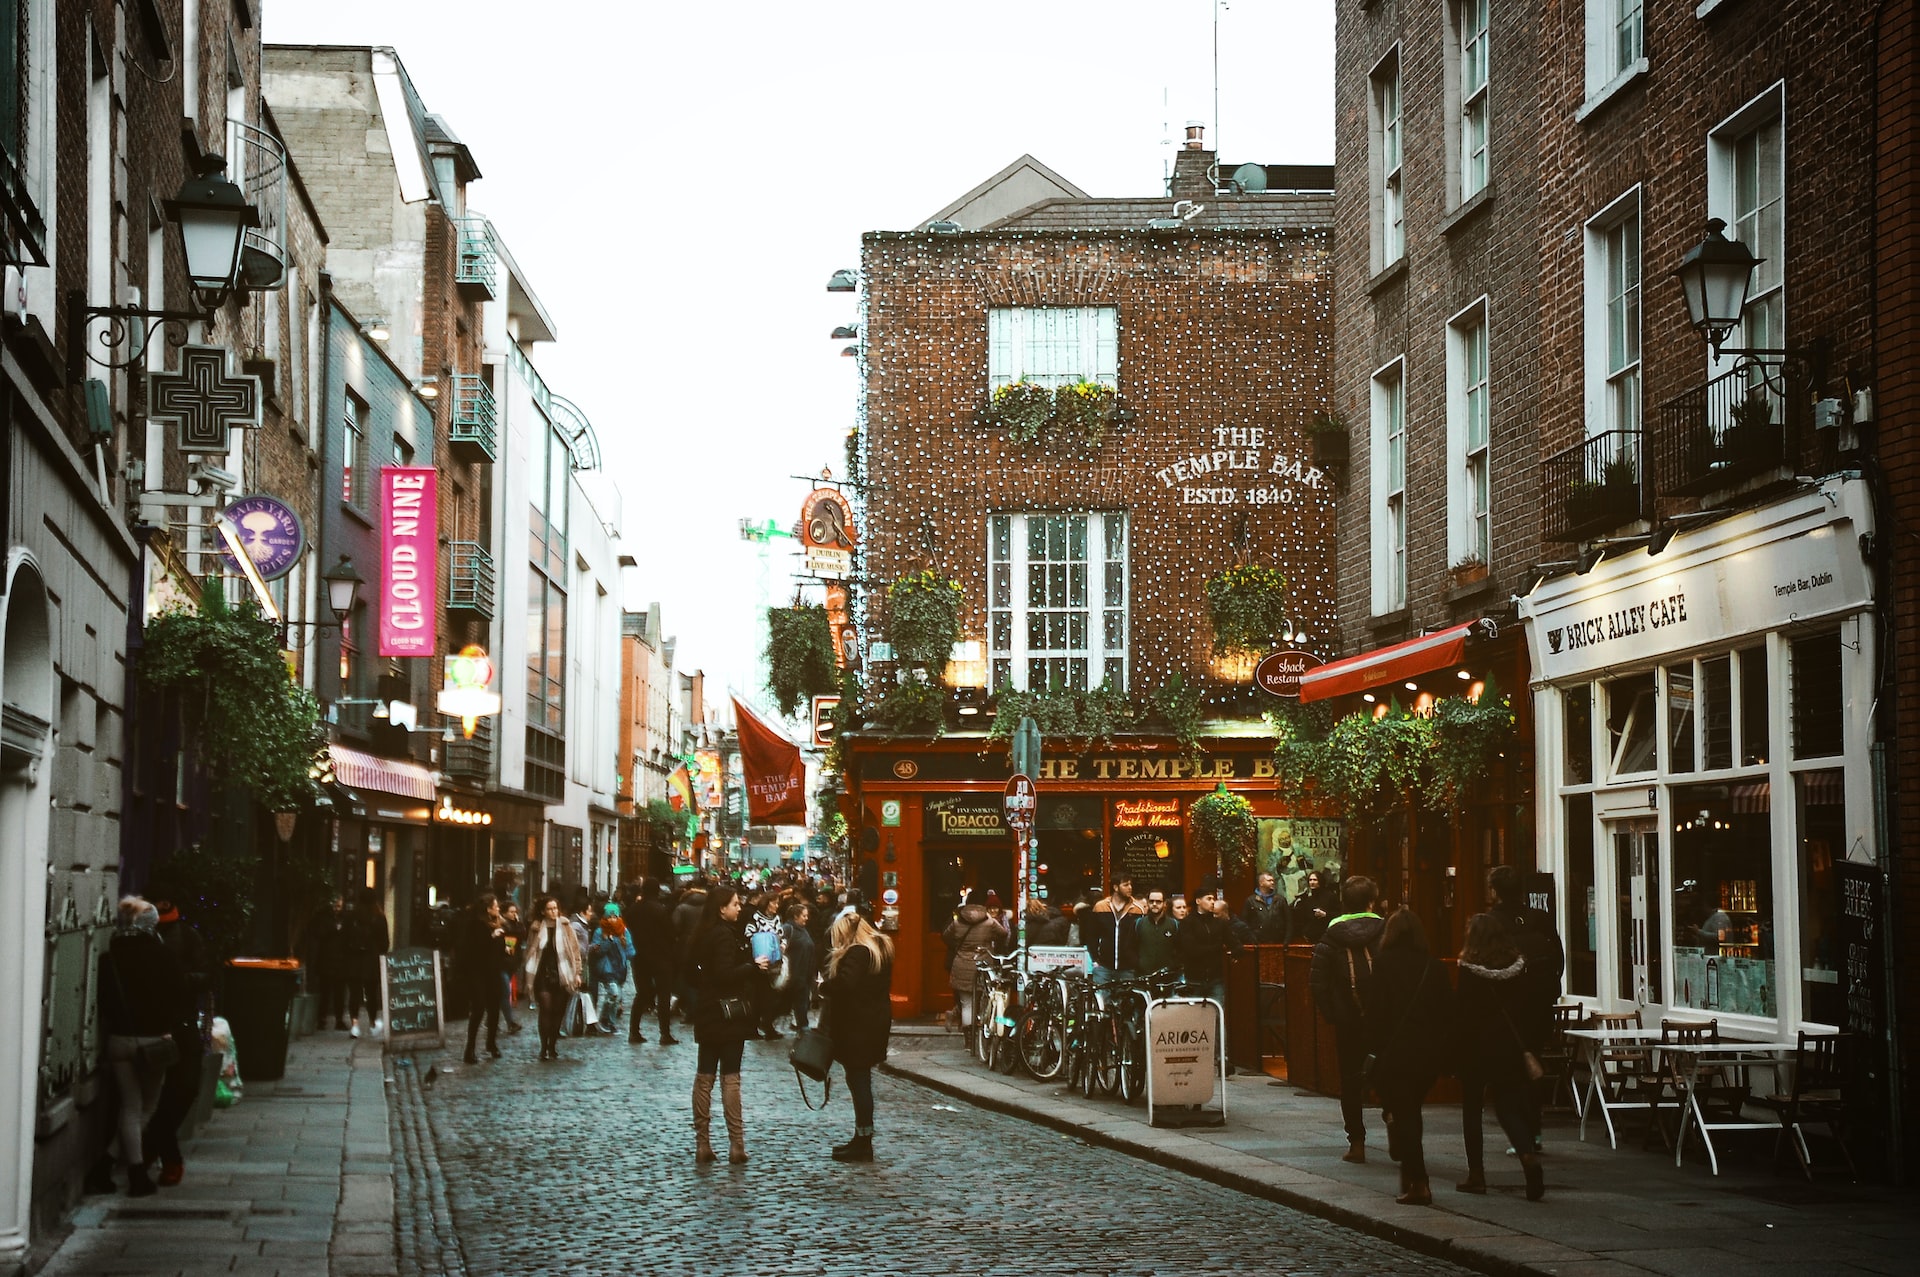 The Temple Bar in Dublin along a cobblestone street in a busy section of town.